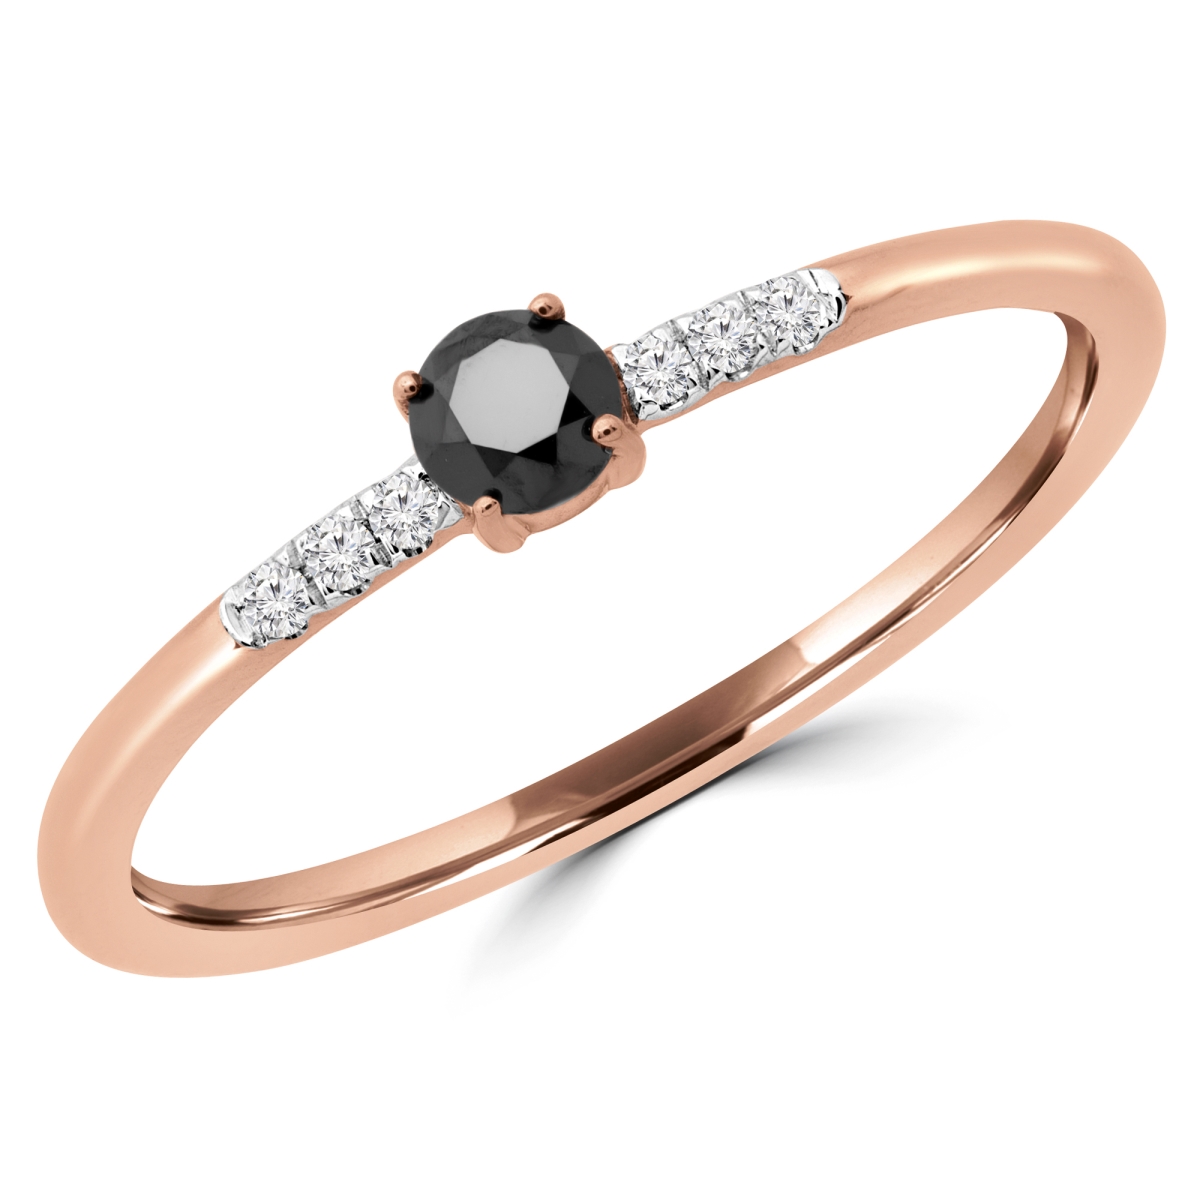 Picture of Majesty Diamonds MDR190079-3.5 0.16 CTW Round Black Diamond Bezel Set Cocktail Ring in 14K Rose Gold - Size 3.5